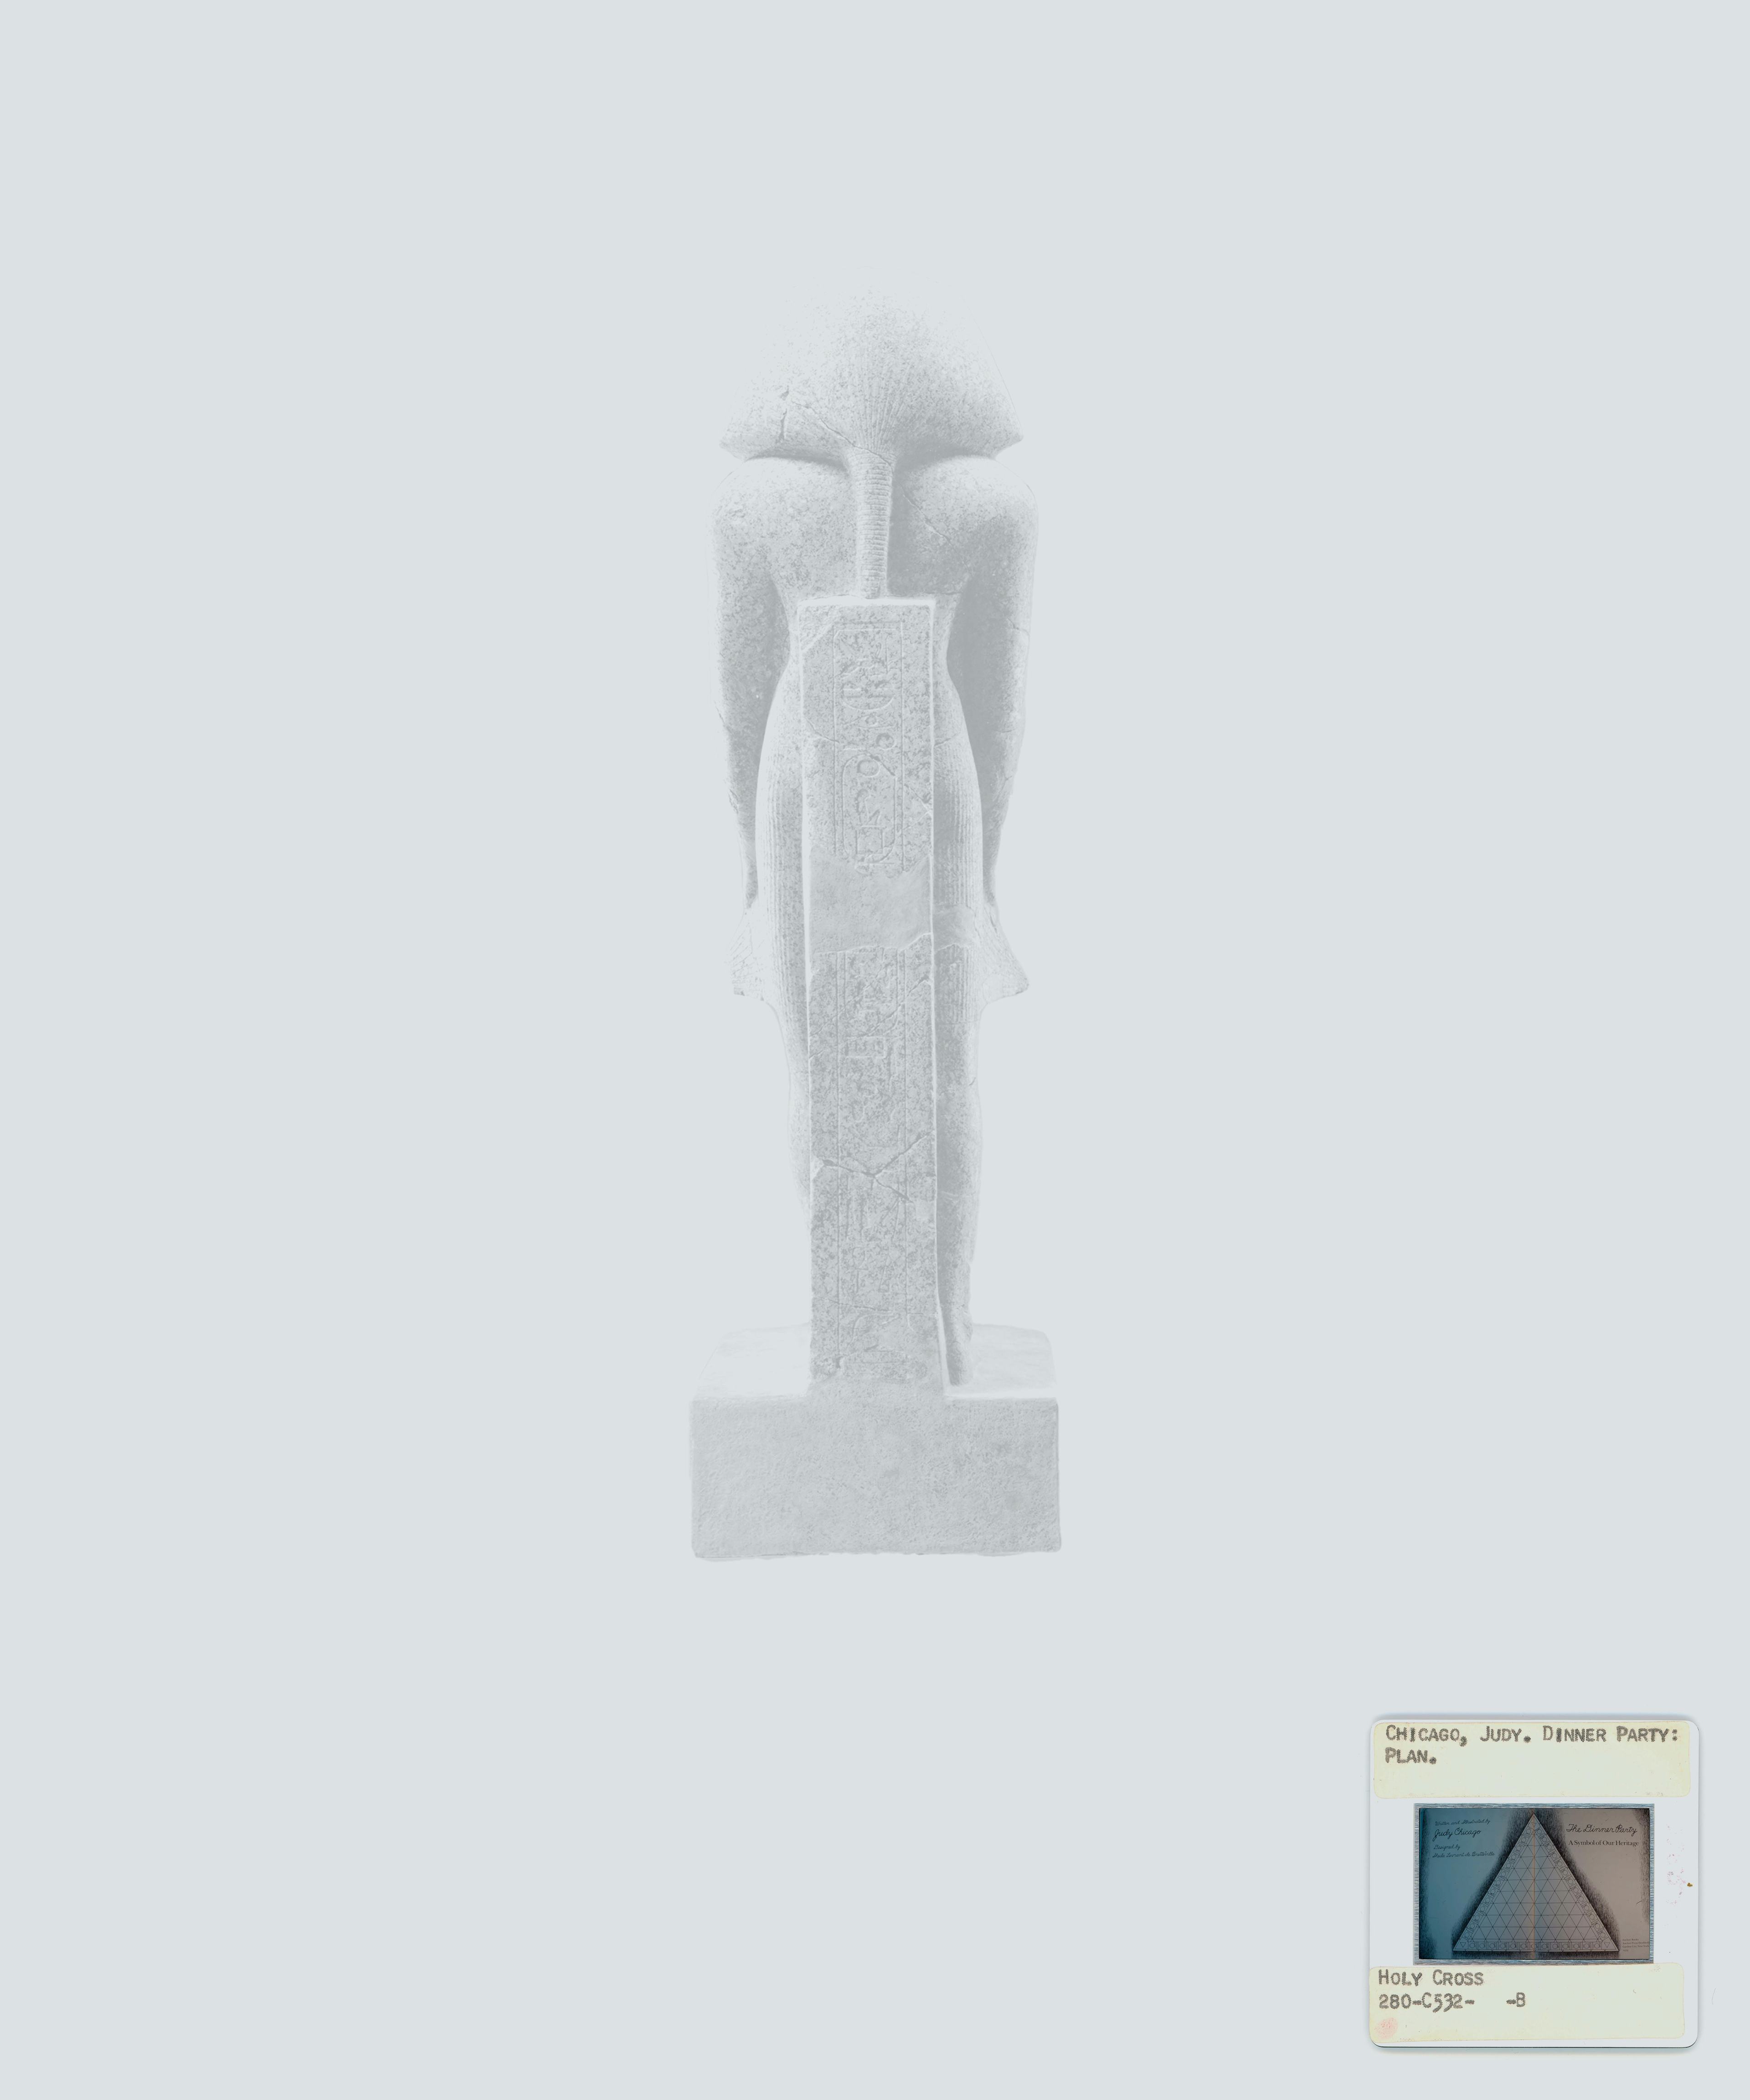 White image of a pharaoh figure, with archival reference on the bottom